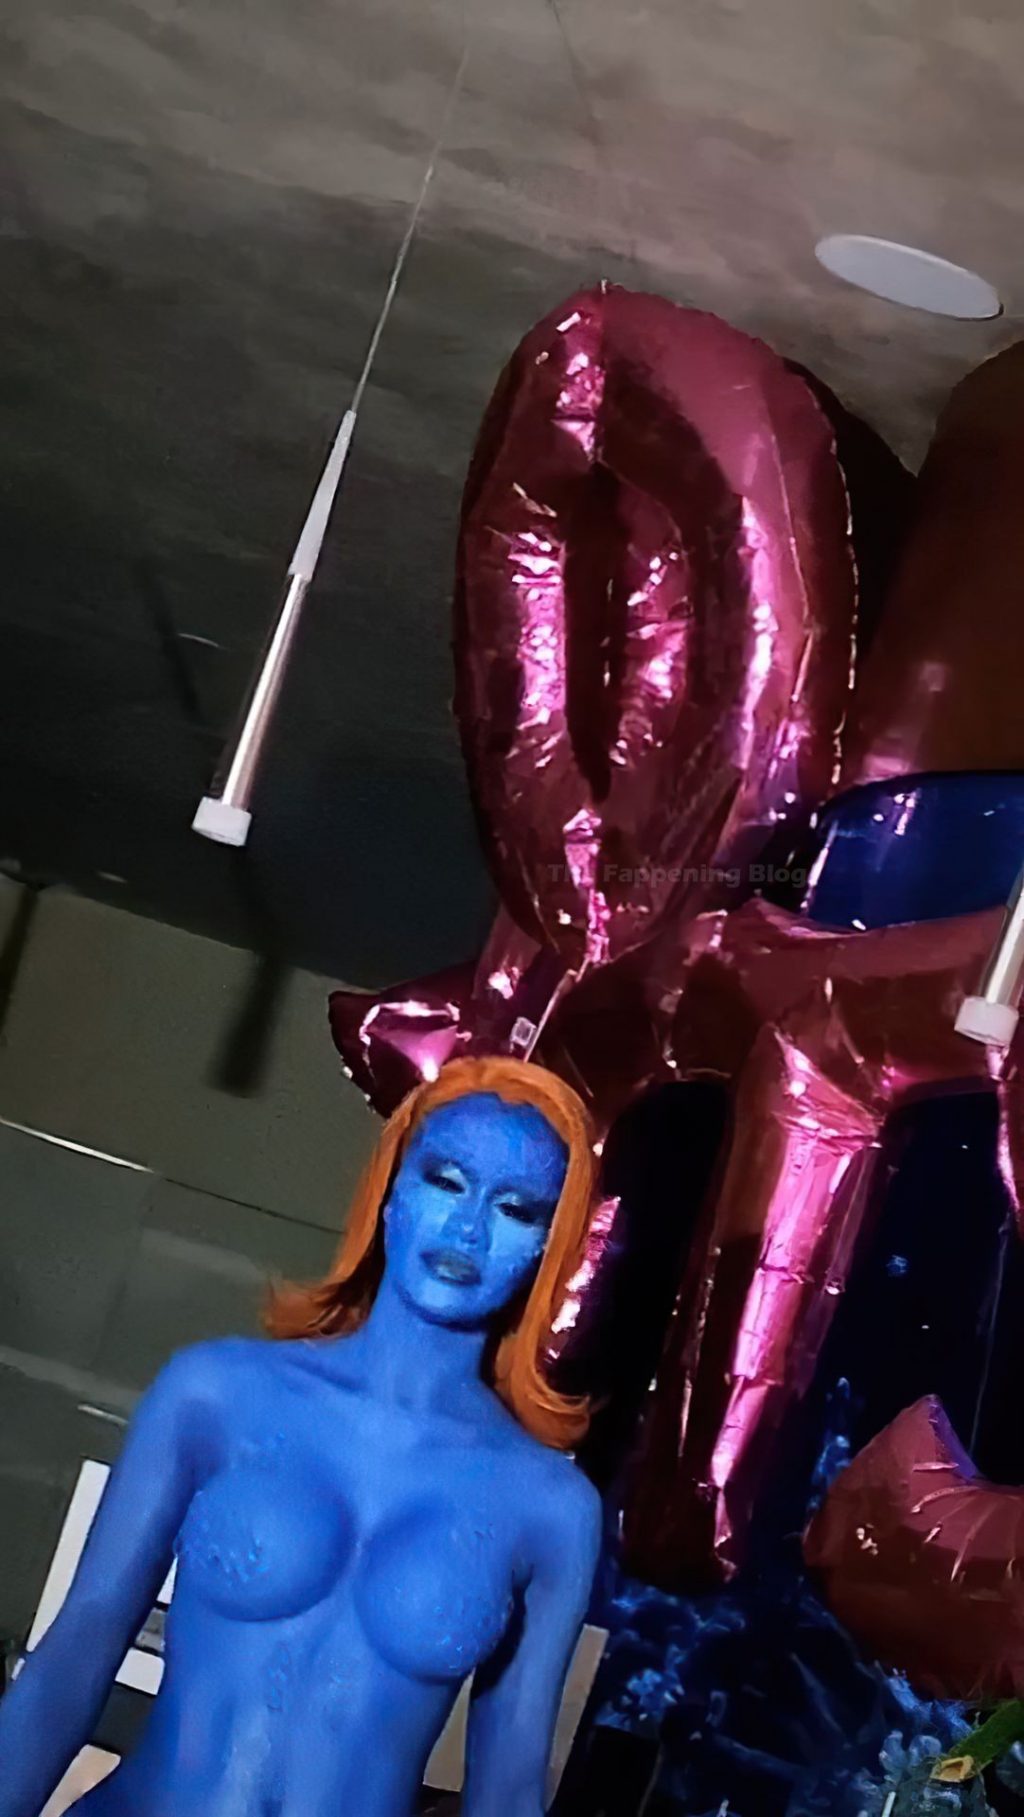 Saweetie Shows Off Her Tits as Mystique (19 Photos + Videos)